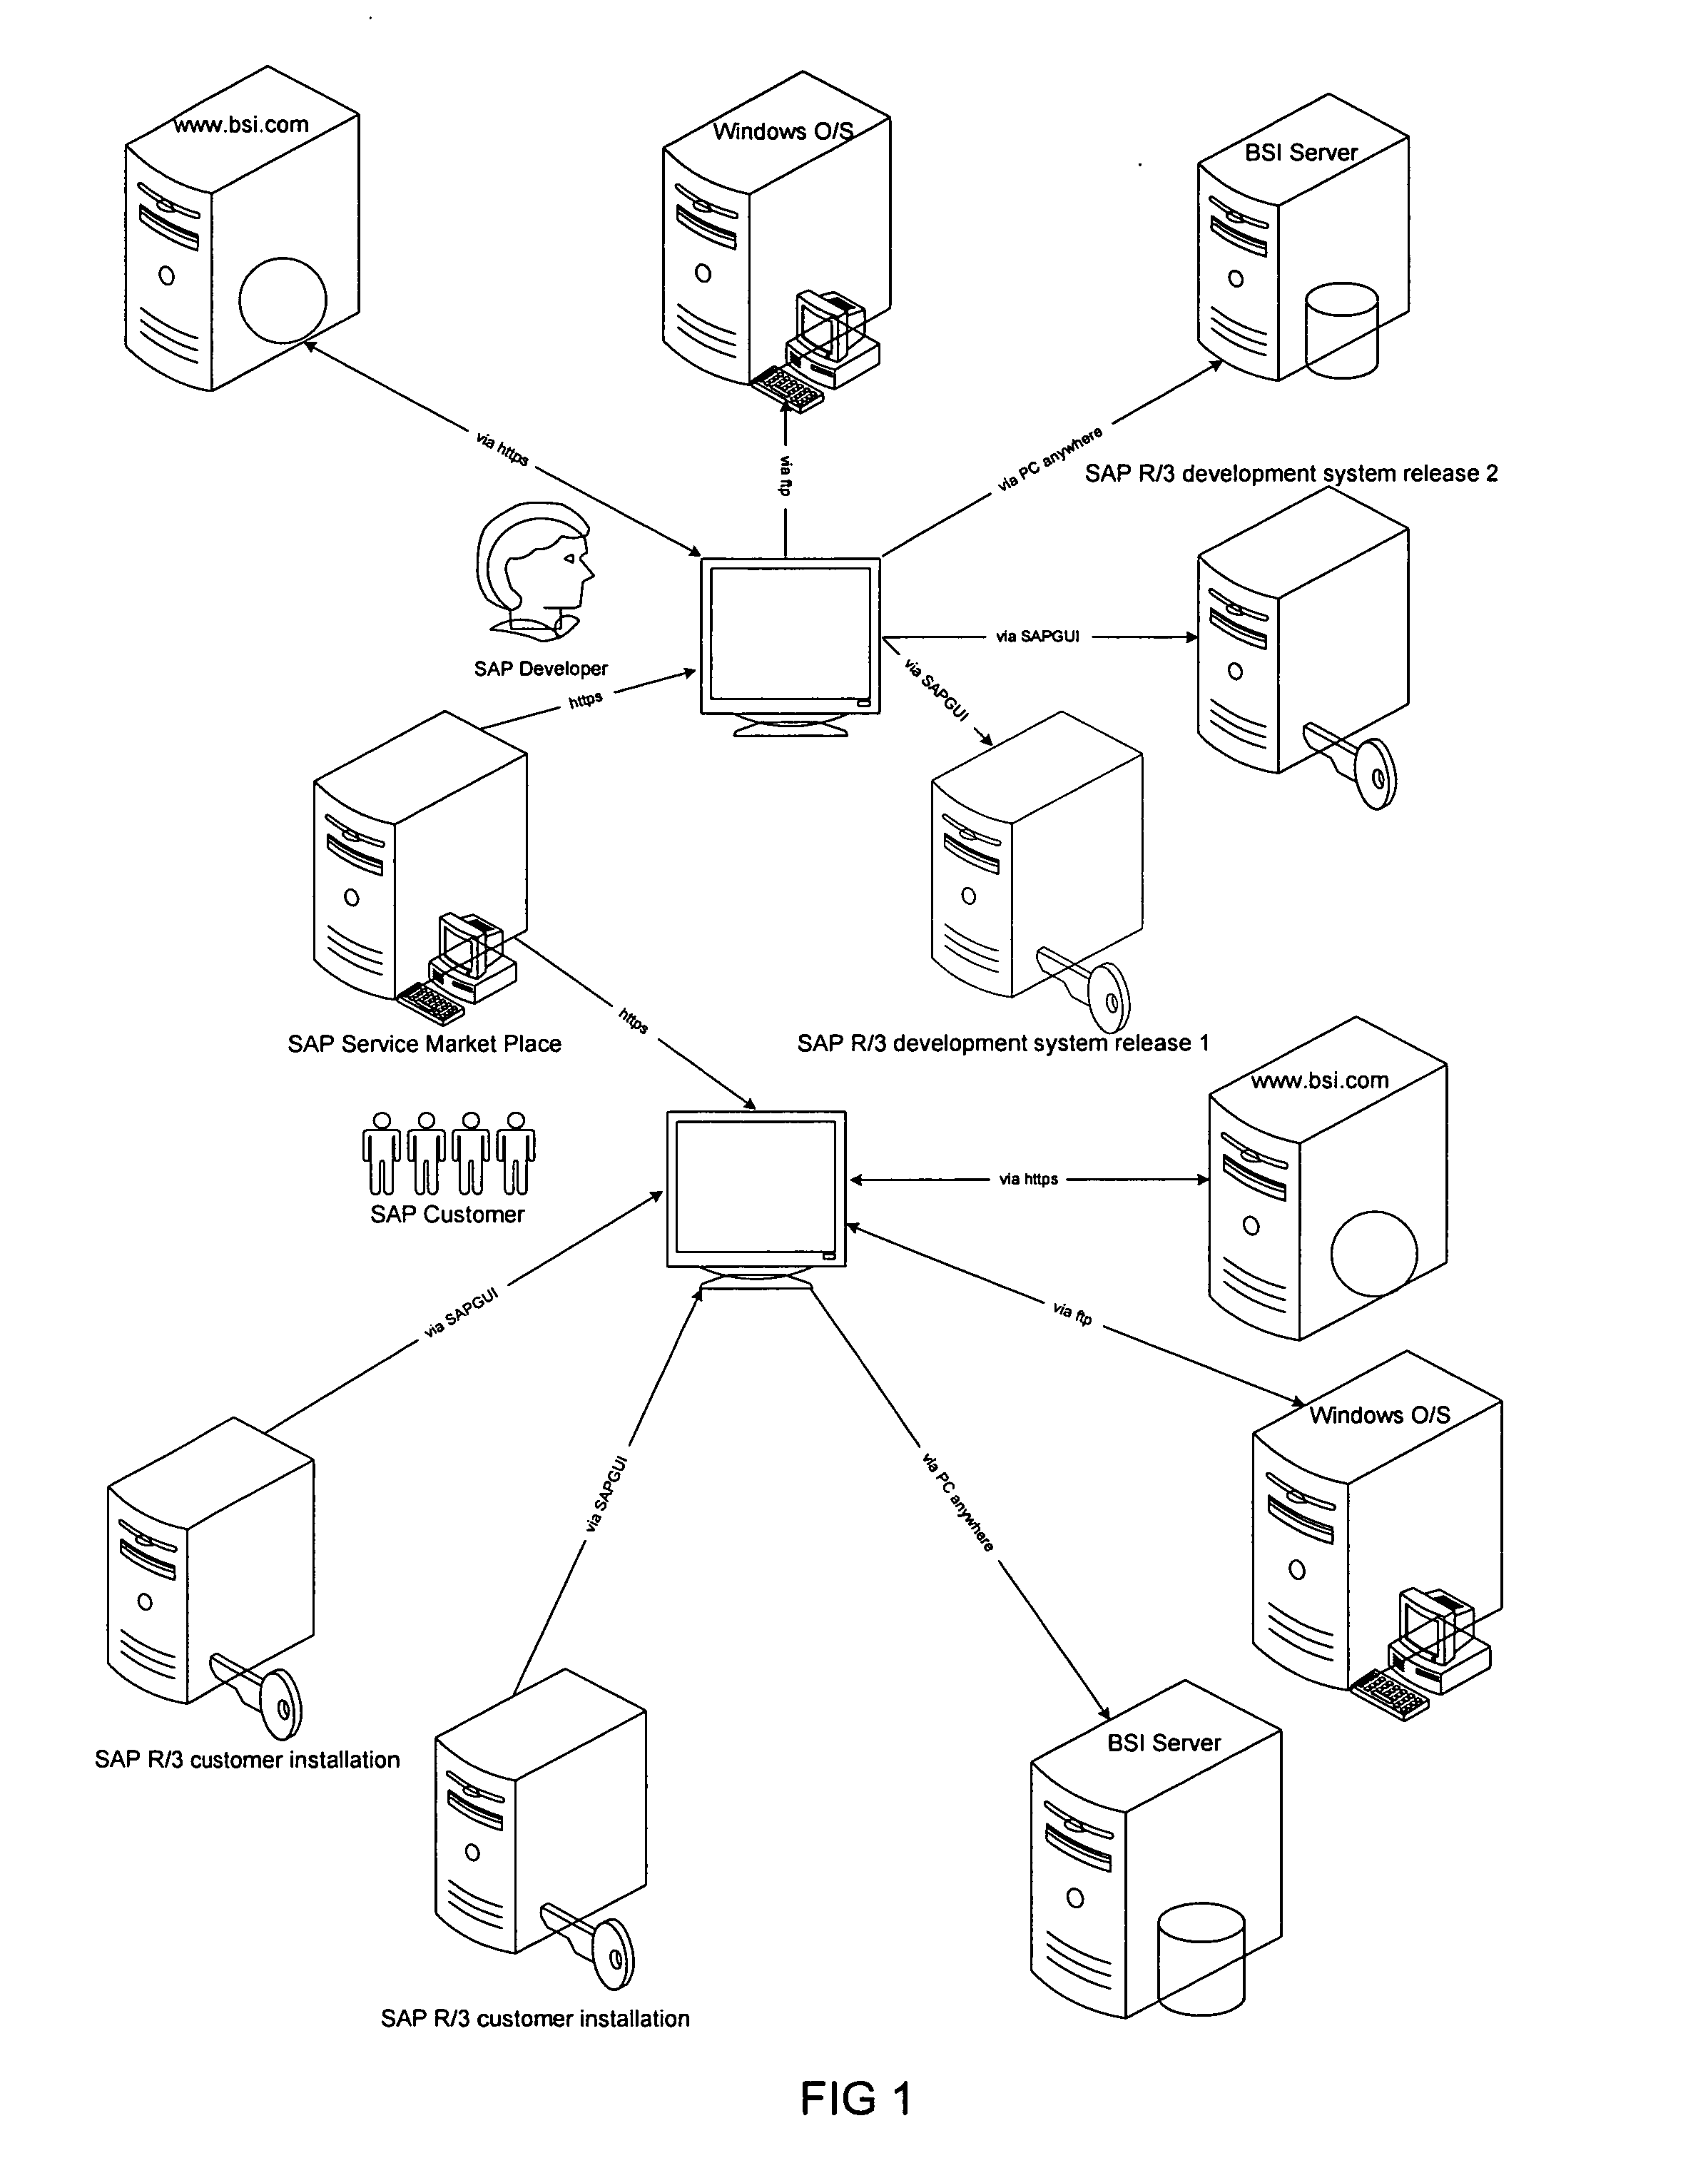 Method and system for assisting in compiling employee tax deduction